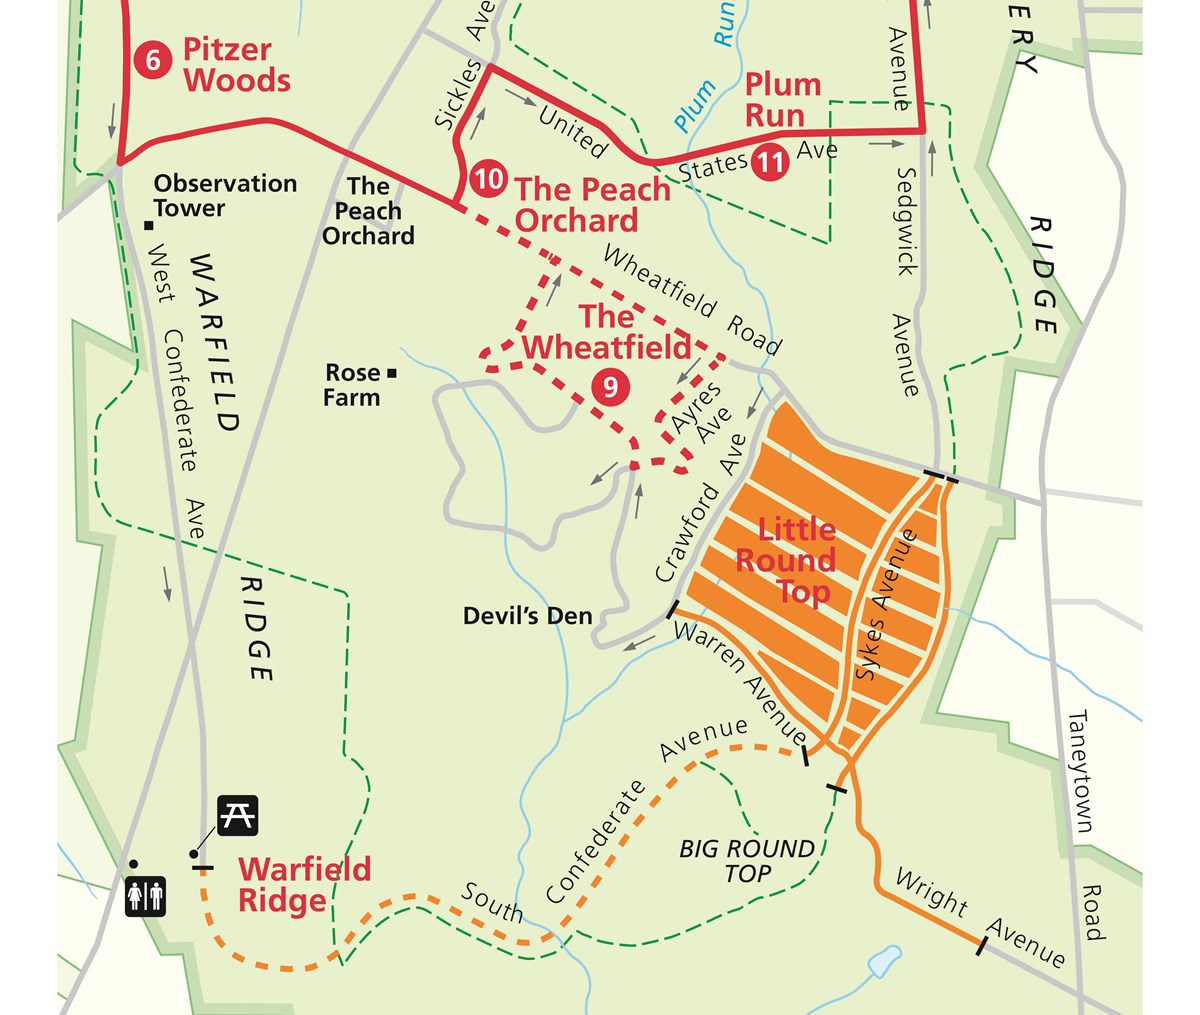 A map of Gettysburg National Military Park Auto Tour with closed area around Little Round Top in red and orange.